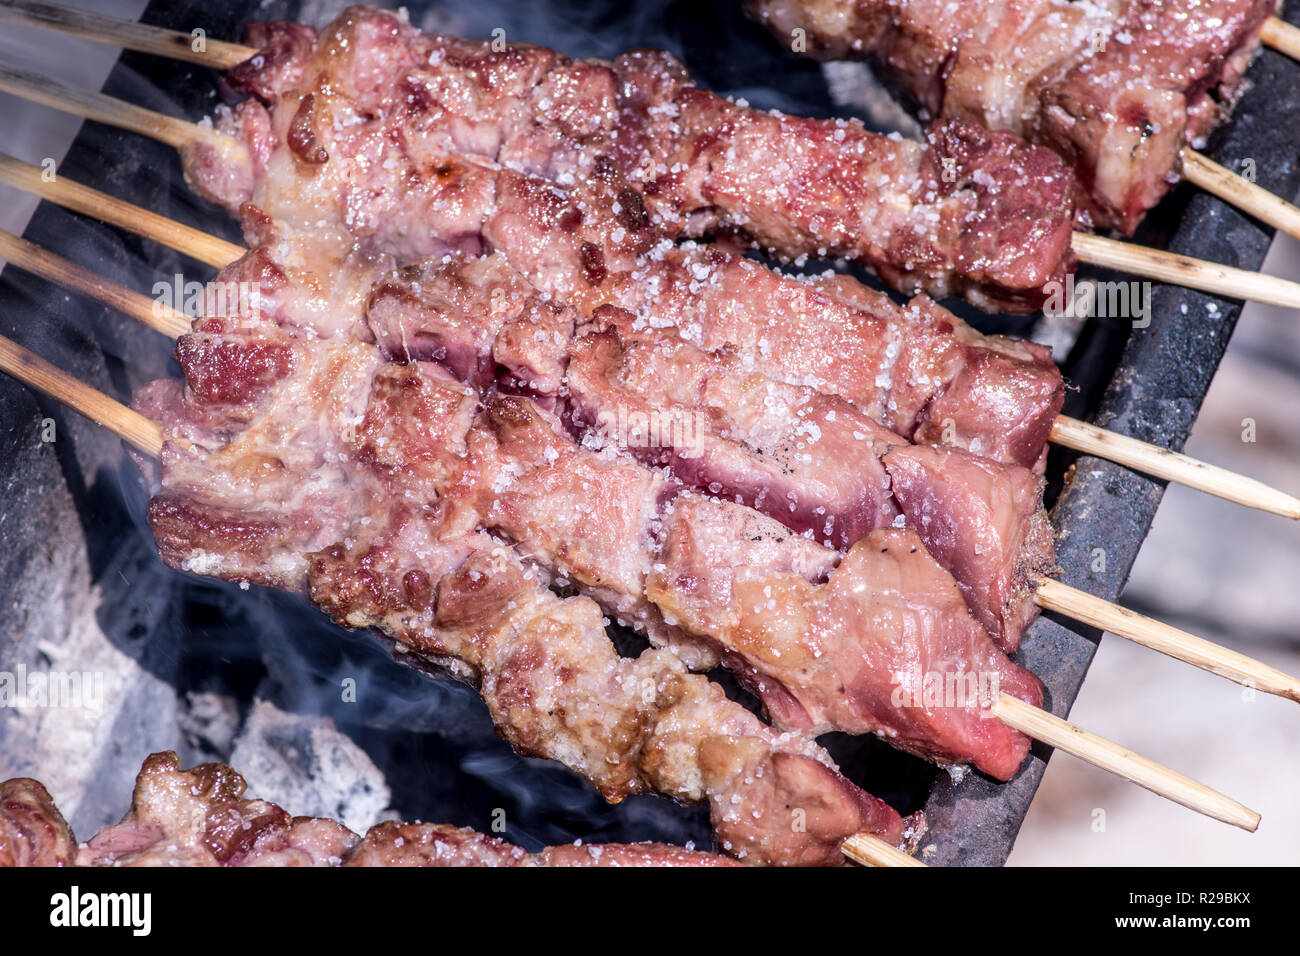 Arrosticini (rustelle or arrustelle in the local dialects; also known as spiedini or spidducci) are typically made from castrated sheep's meat (mutton Stock Photo